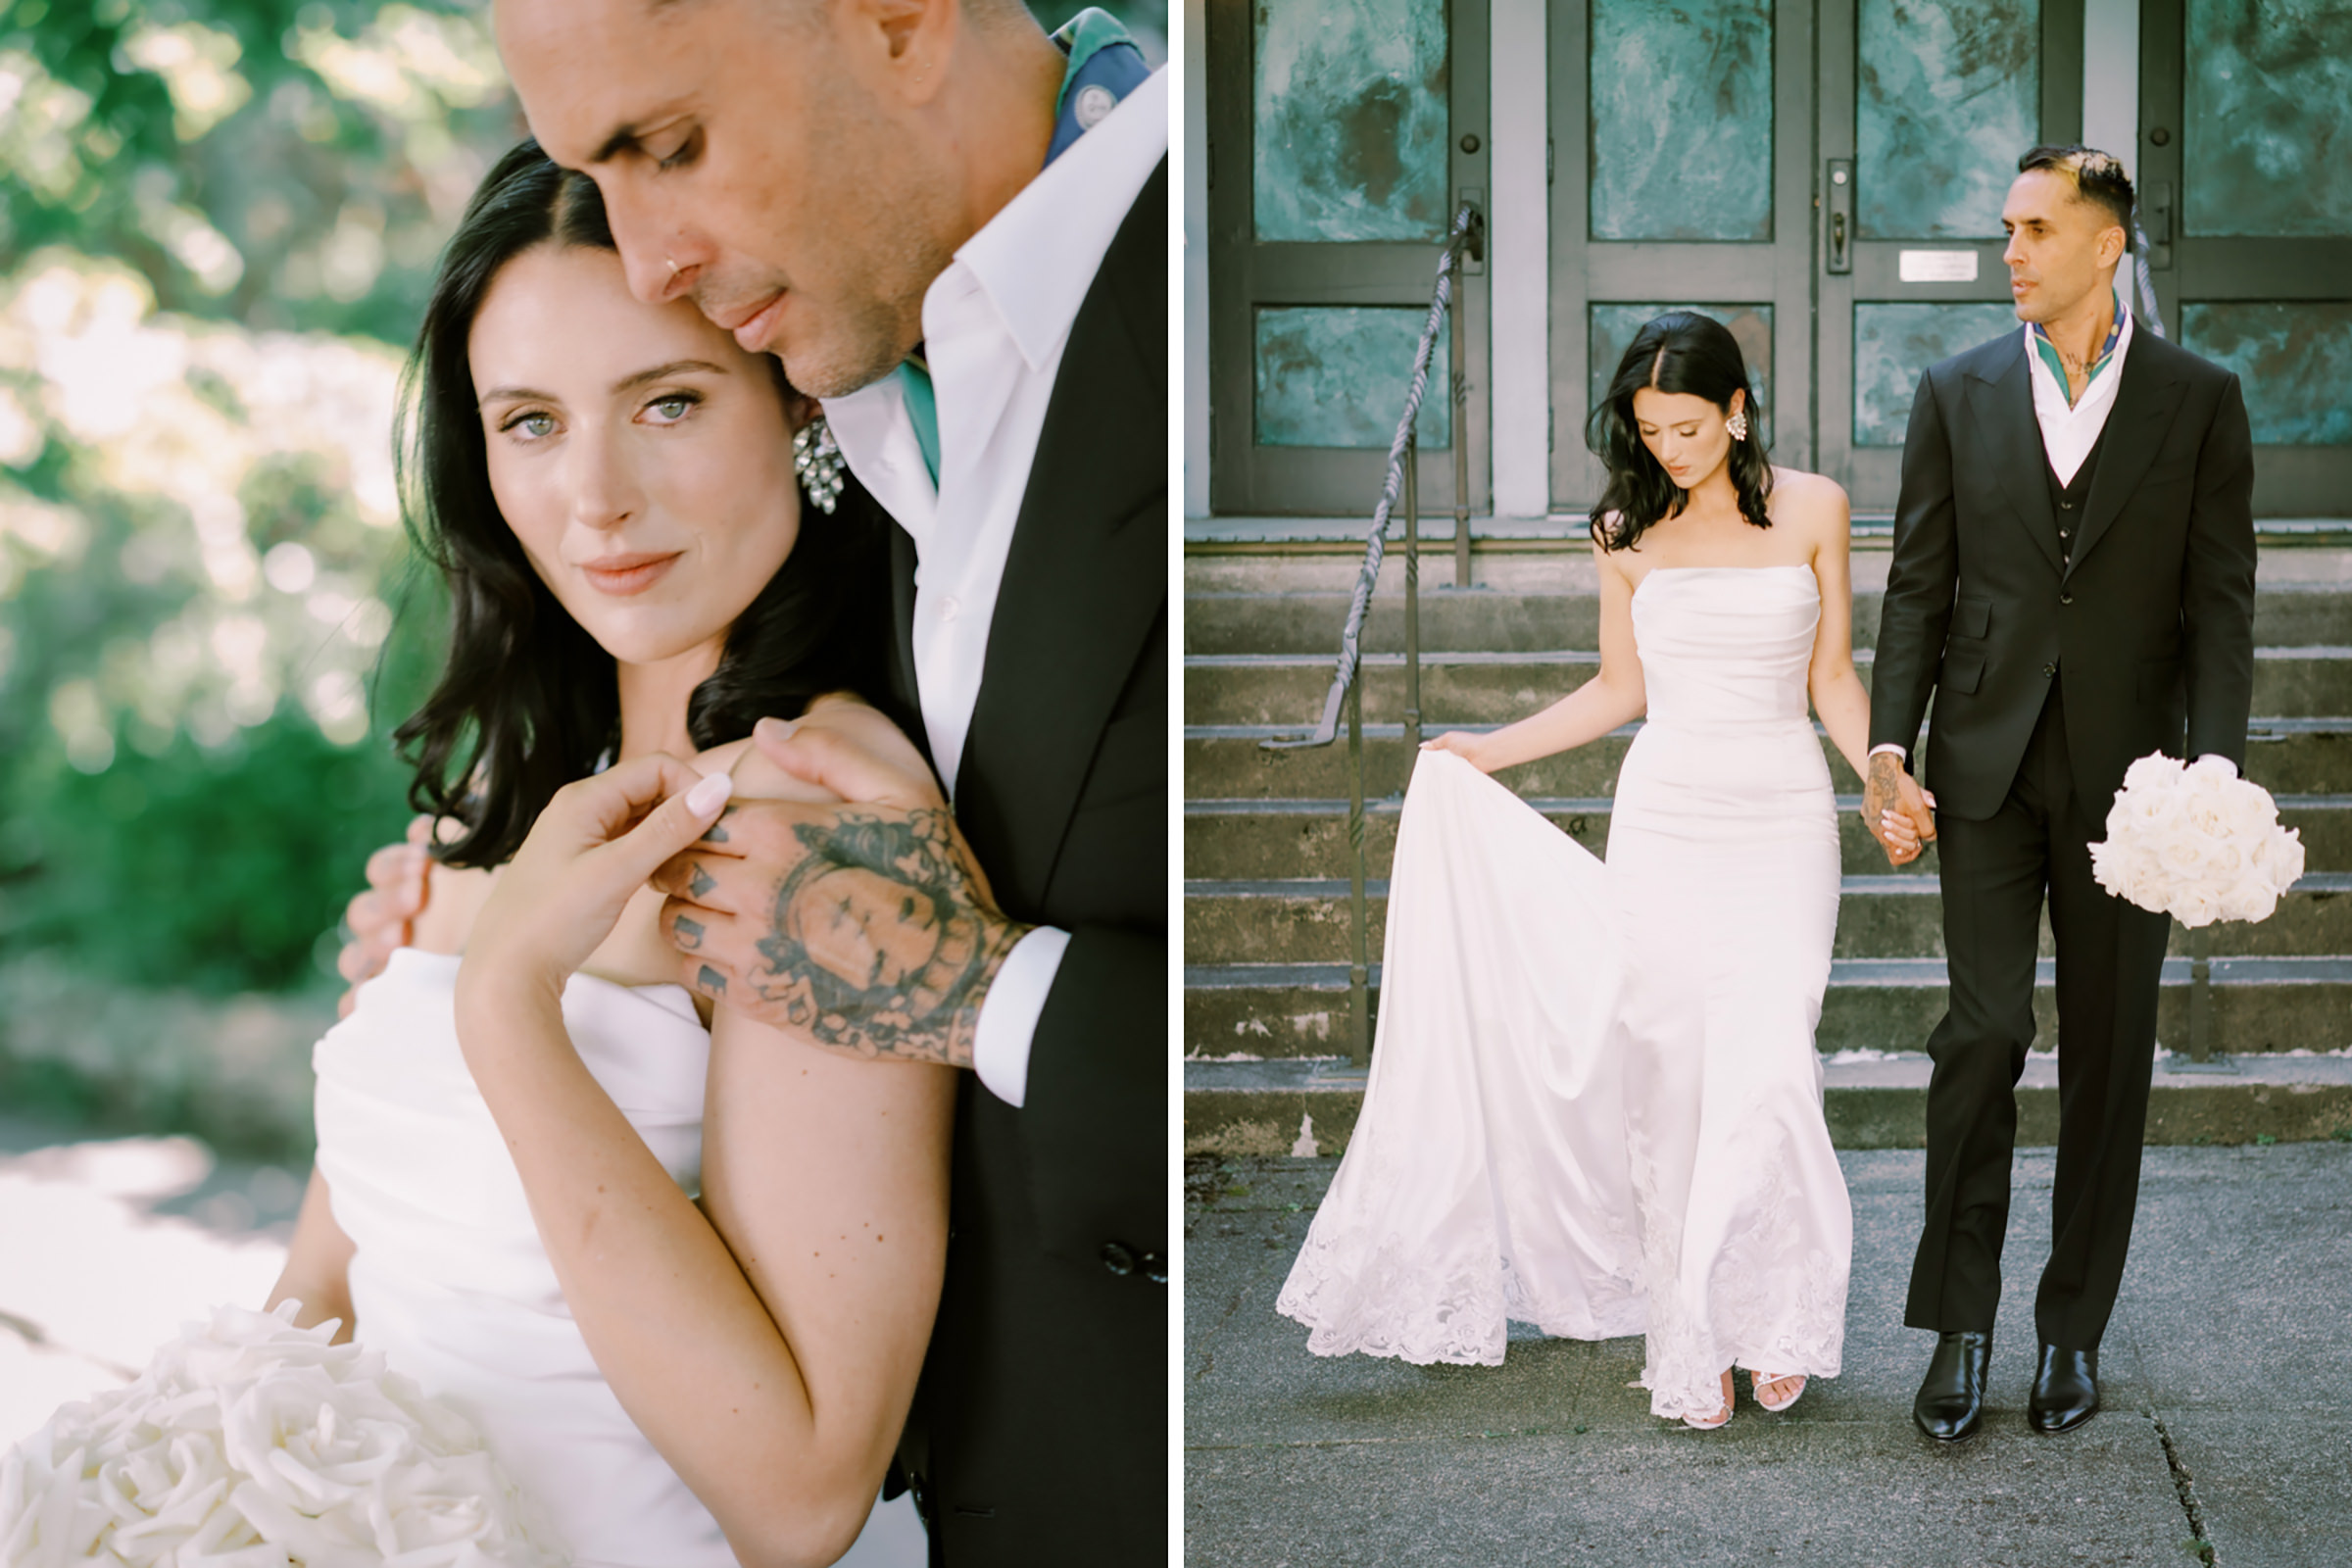 Alexa and Peter's wedding portraits by Belle Chapel at Snohomish, WA